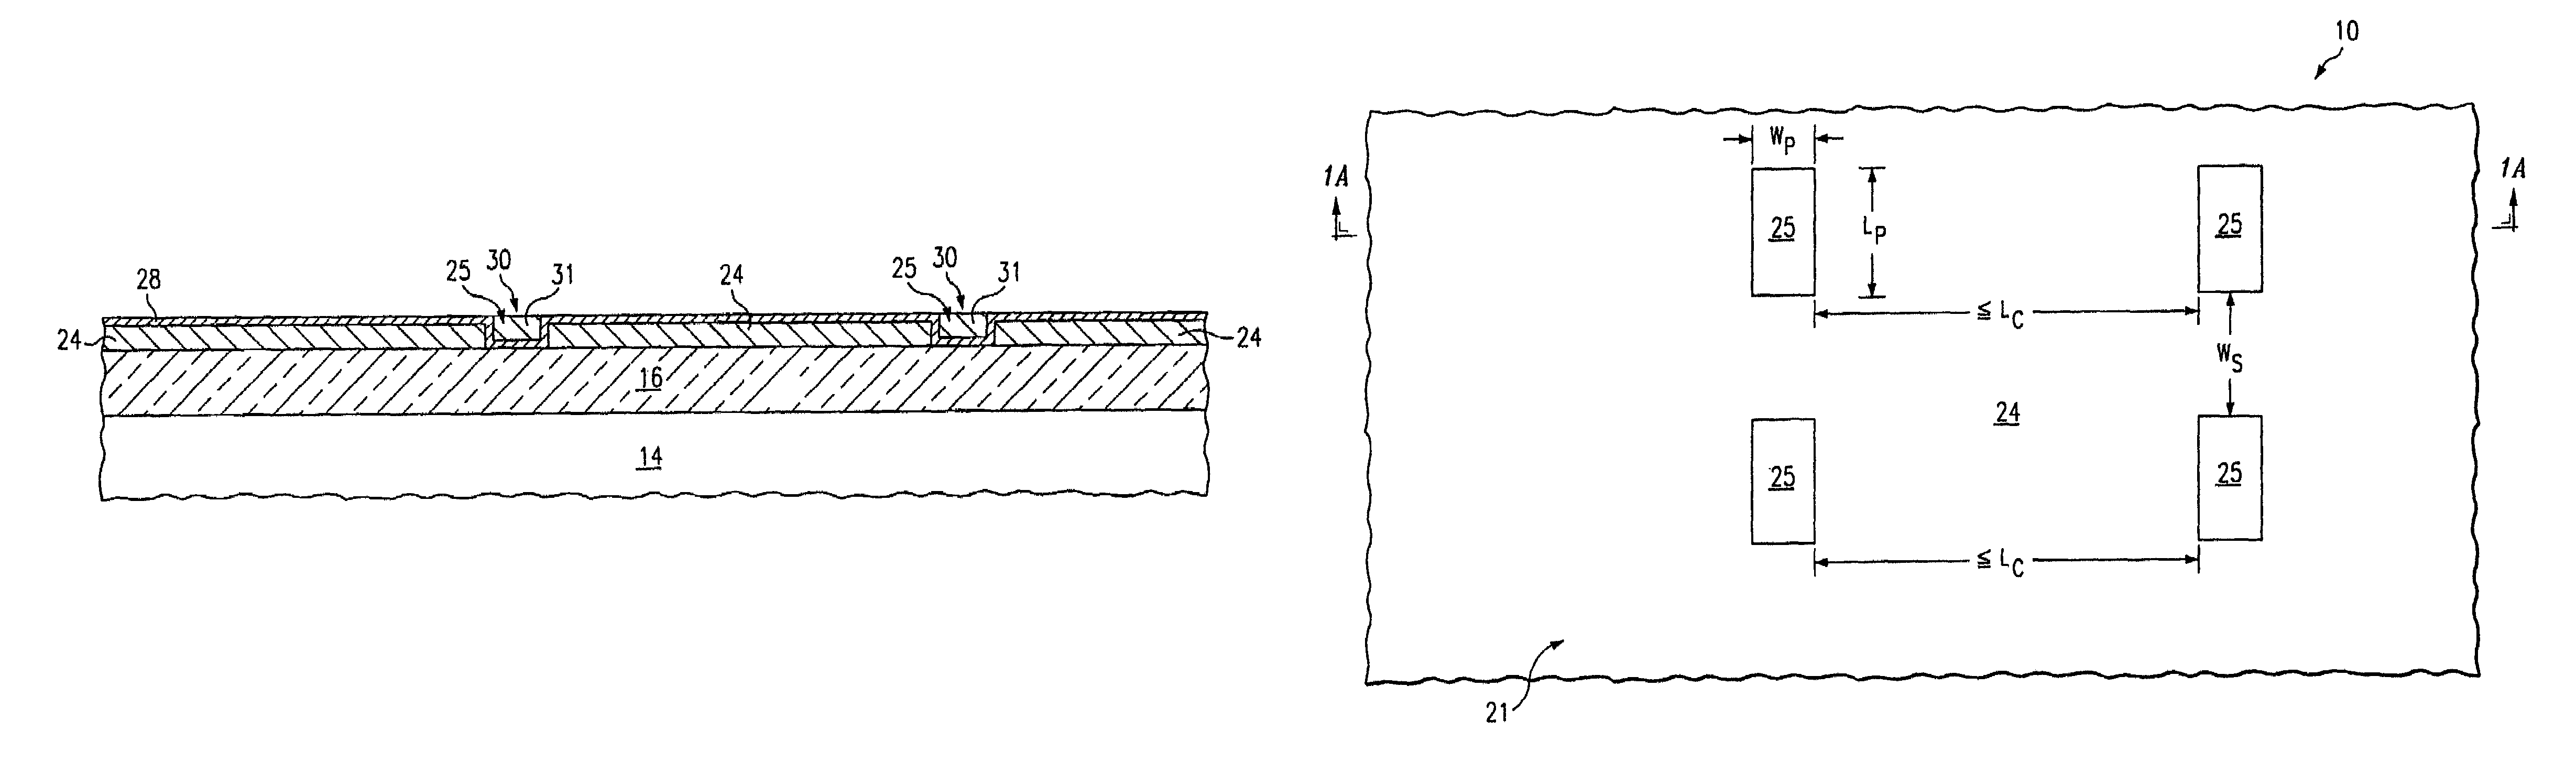 Method of forming electrical interconnects having electromigration-inhibiting segments relative to a critical length